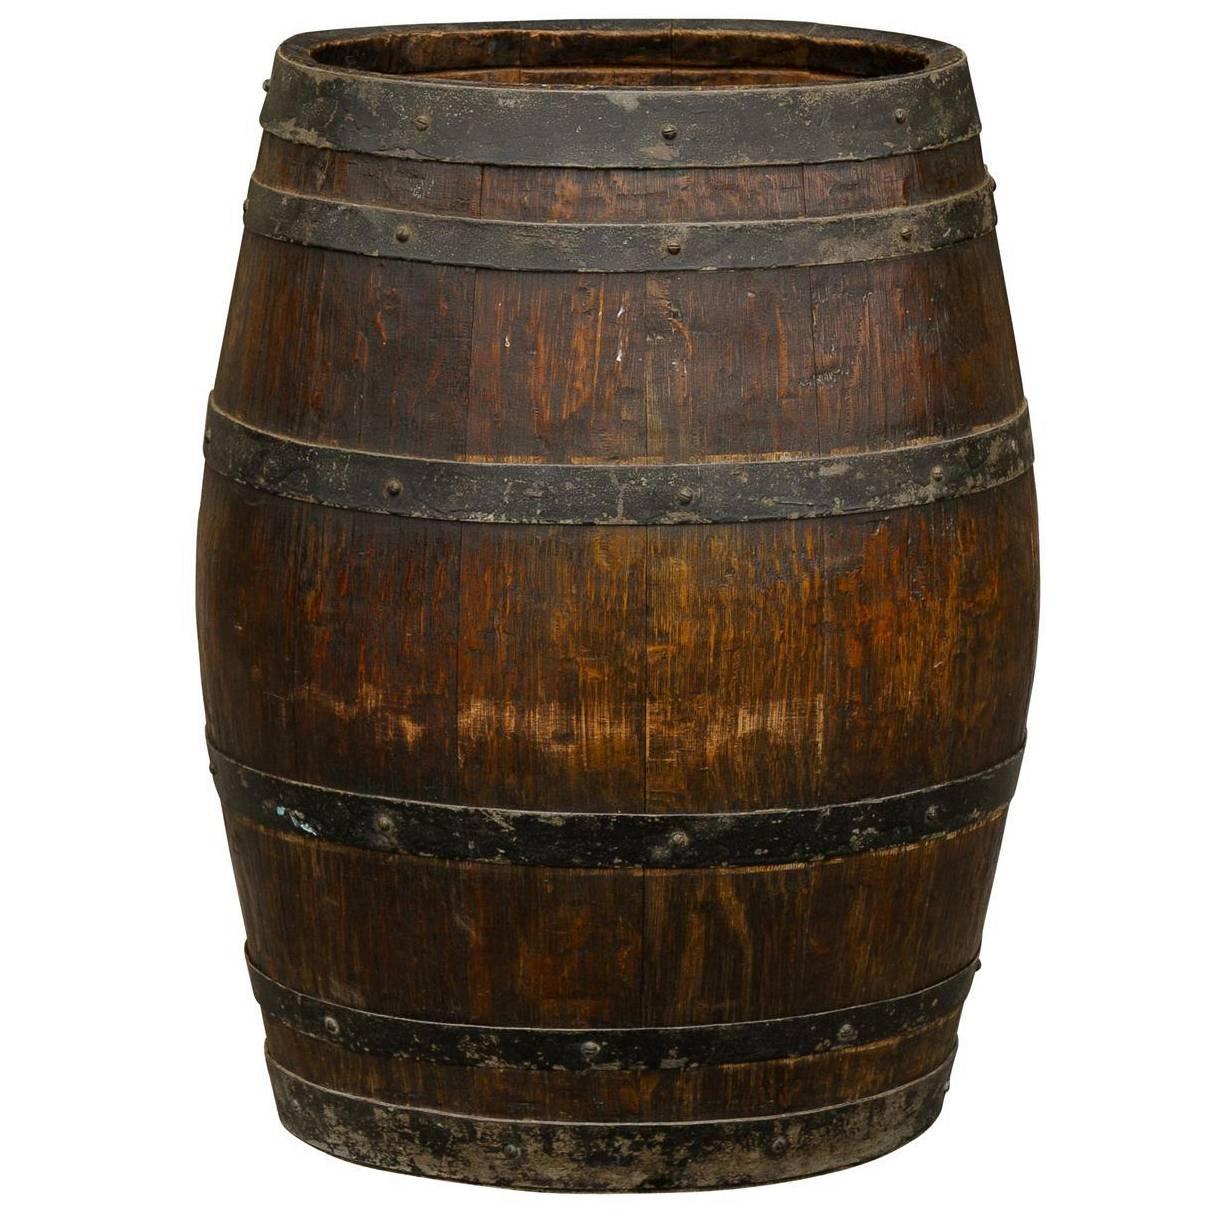 Rustic English Wooden Barrel with Metal Straps from the Late 19th Century